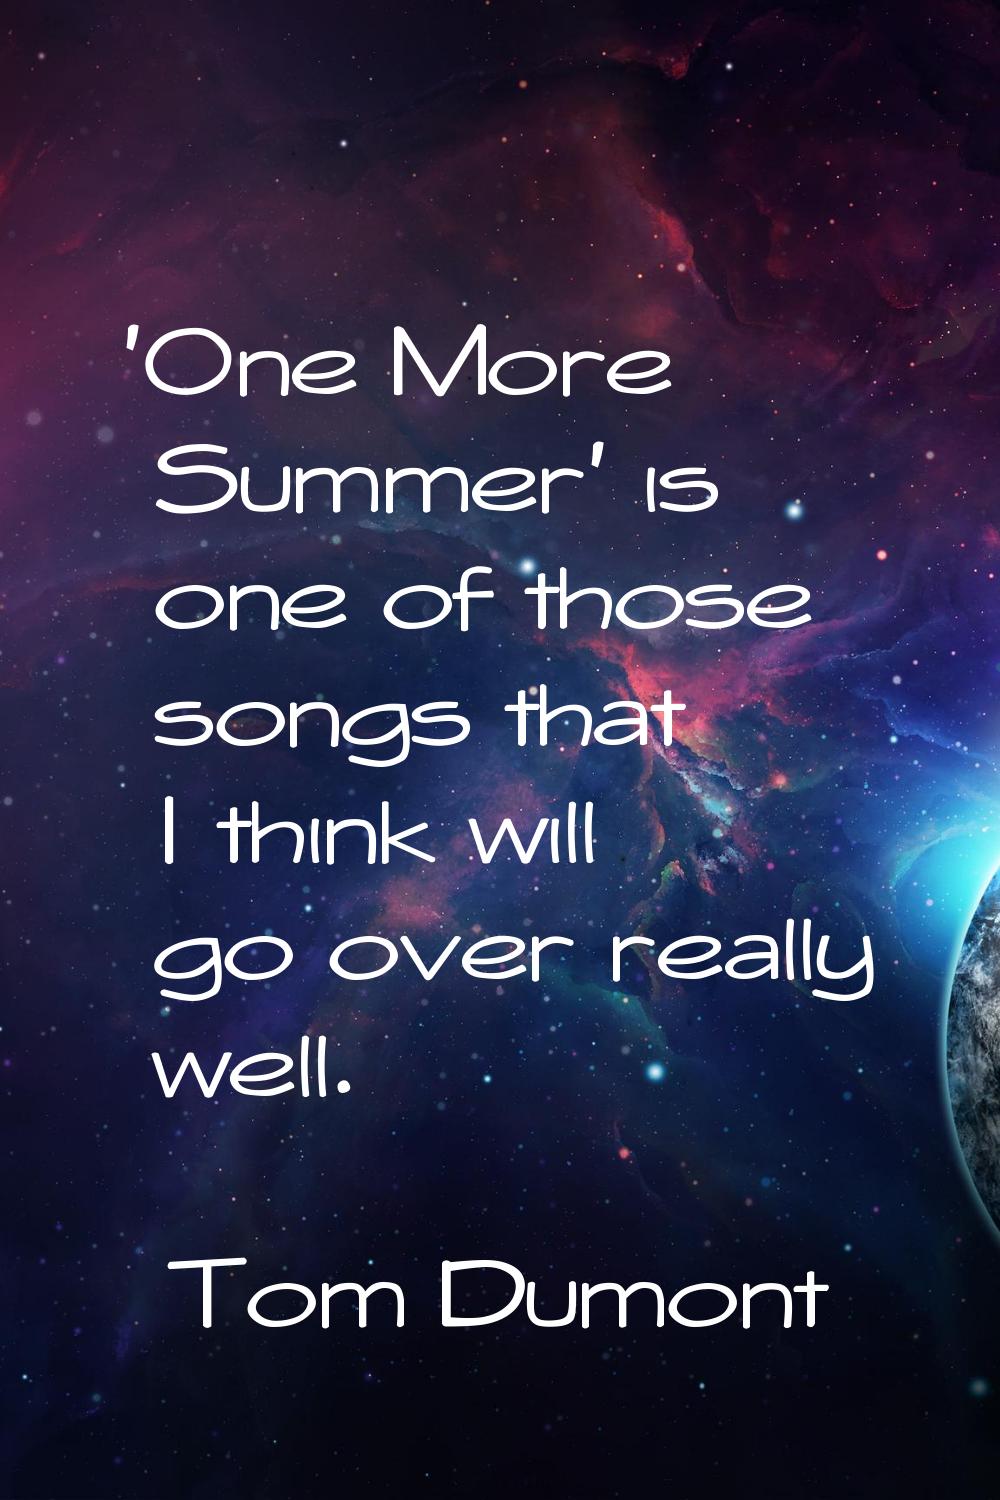 'One More Summer' is one of those songs that I think will go over really well.